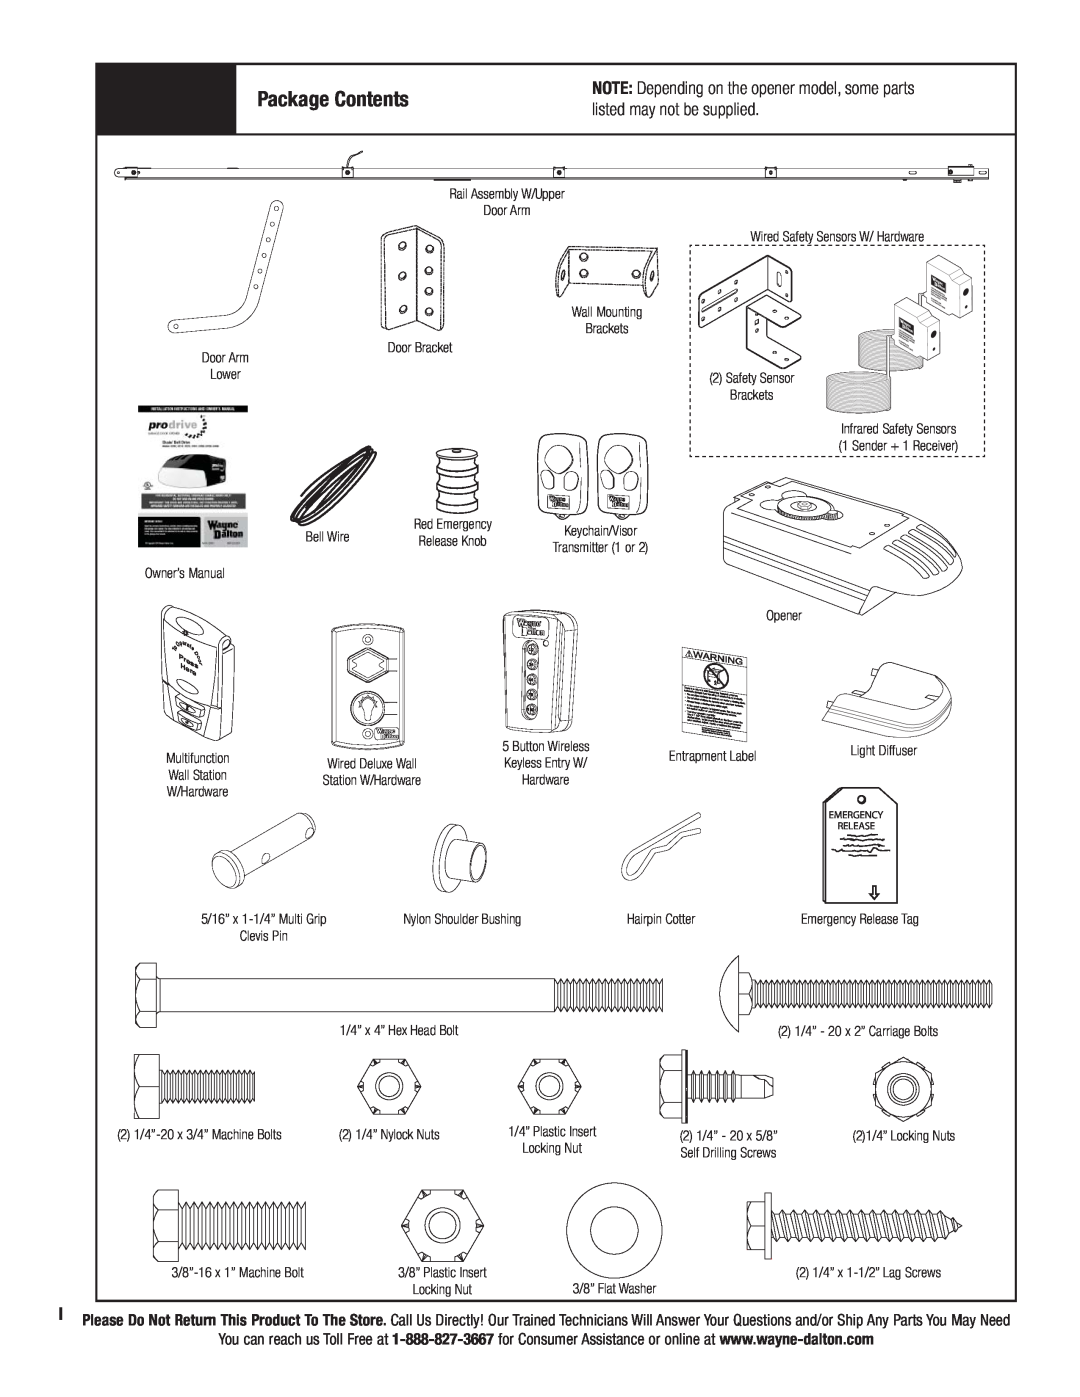 Wayne-Dalton 3324B, 3322B-Z, 3224C-Z, 3222C-Z, 3220C-Z, 3221C-Z, 3320B-Z installation instructions Package Contents 